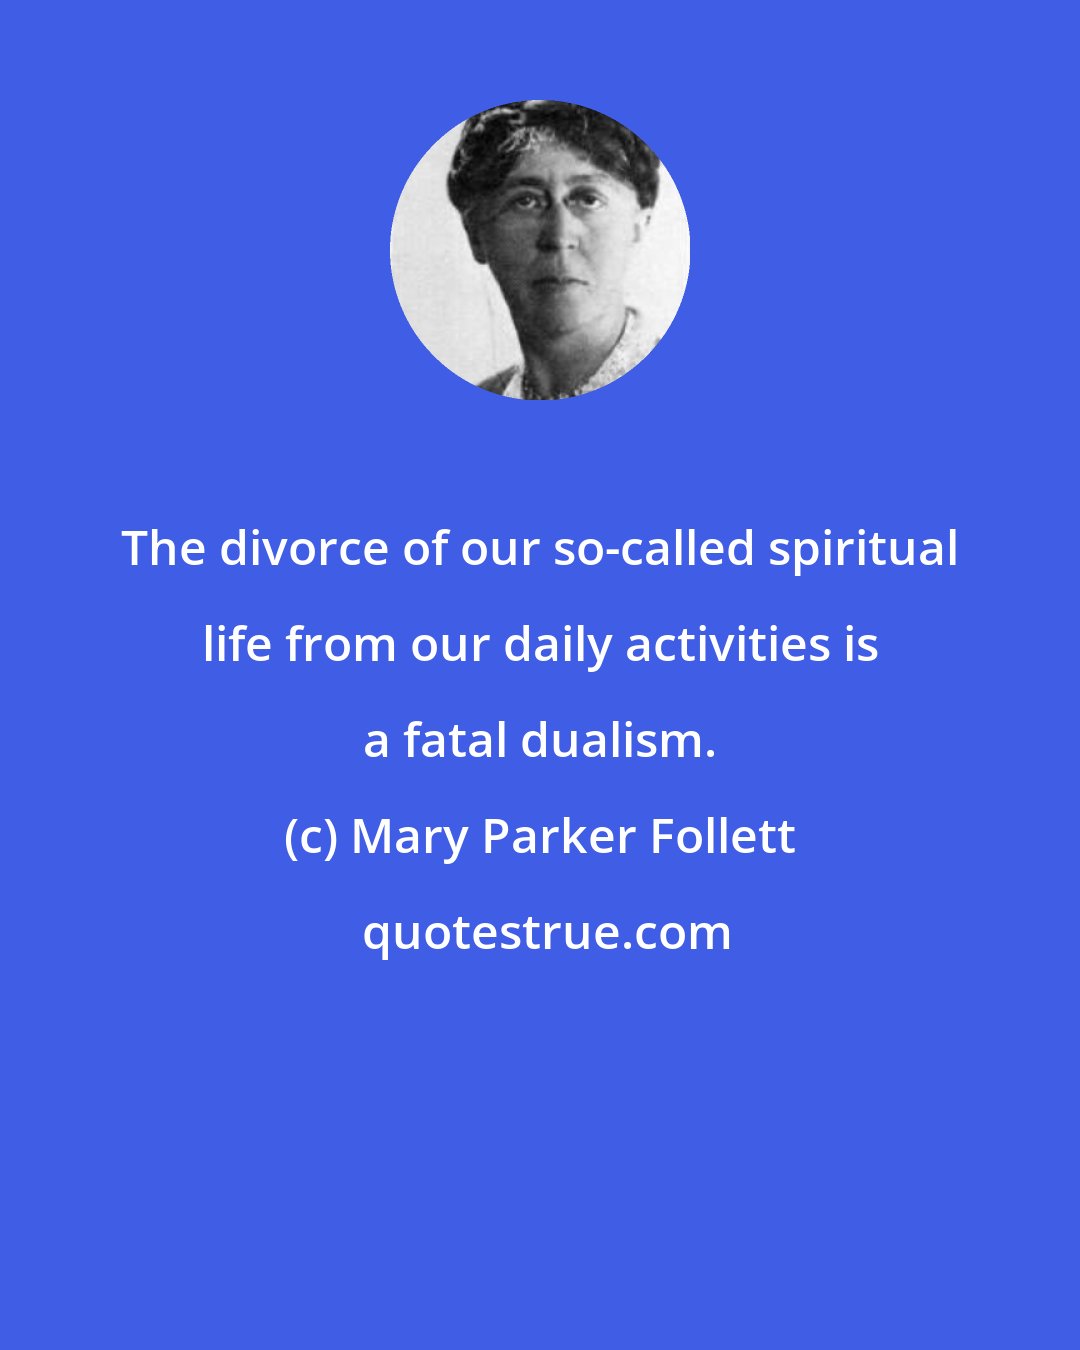 Mary Parker Follett: The divorce of our so-called spiritual life from our daily activities is a fatal dualism.